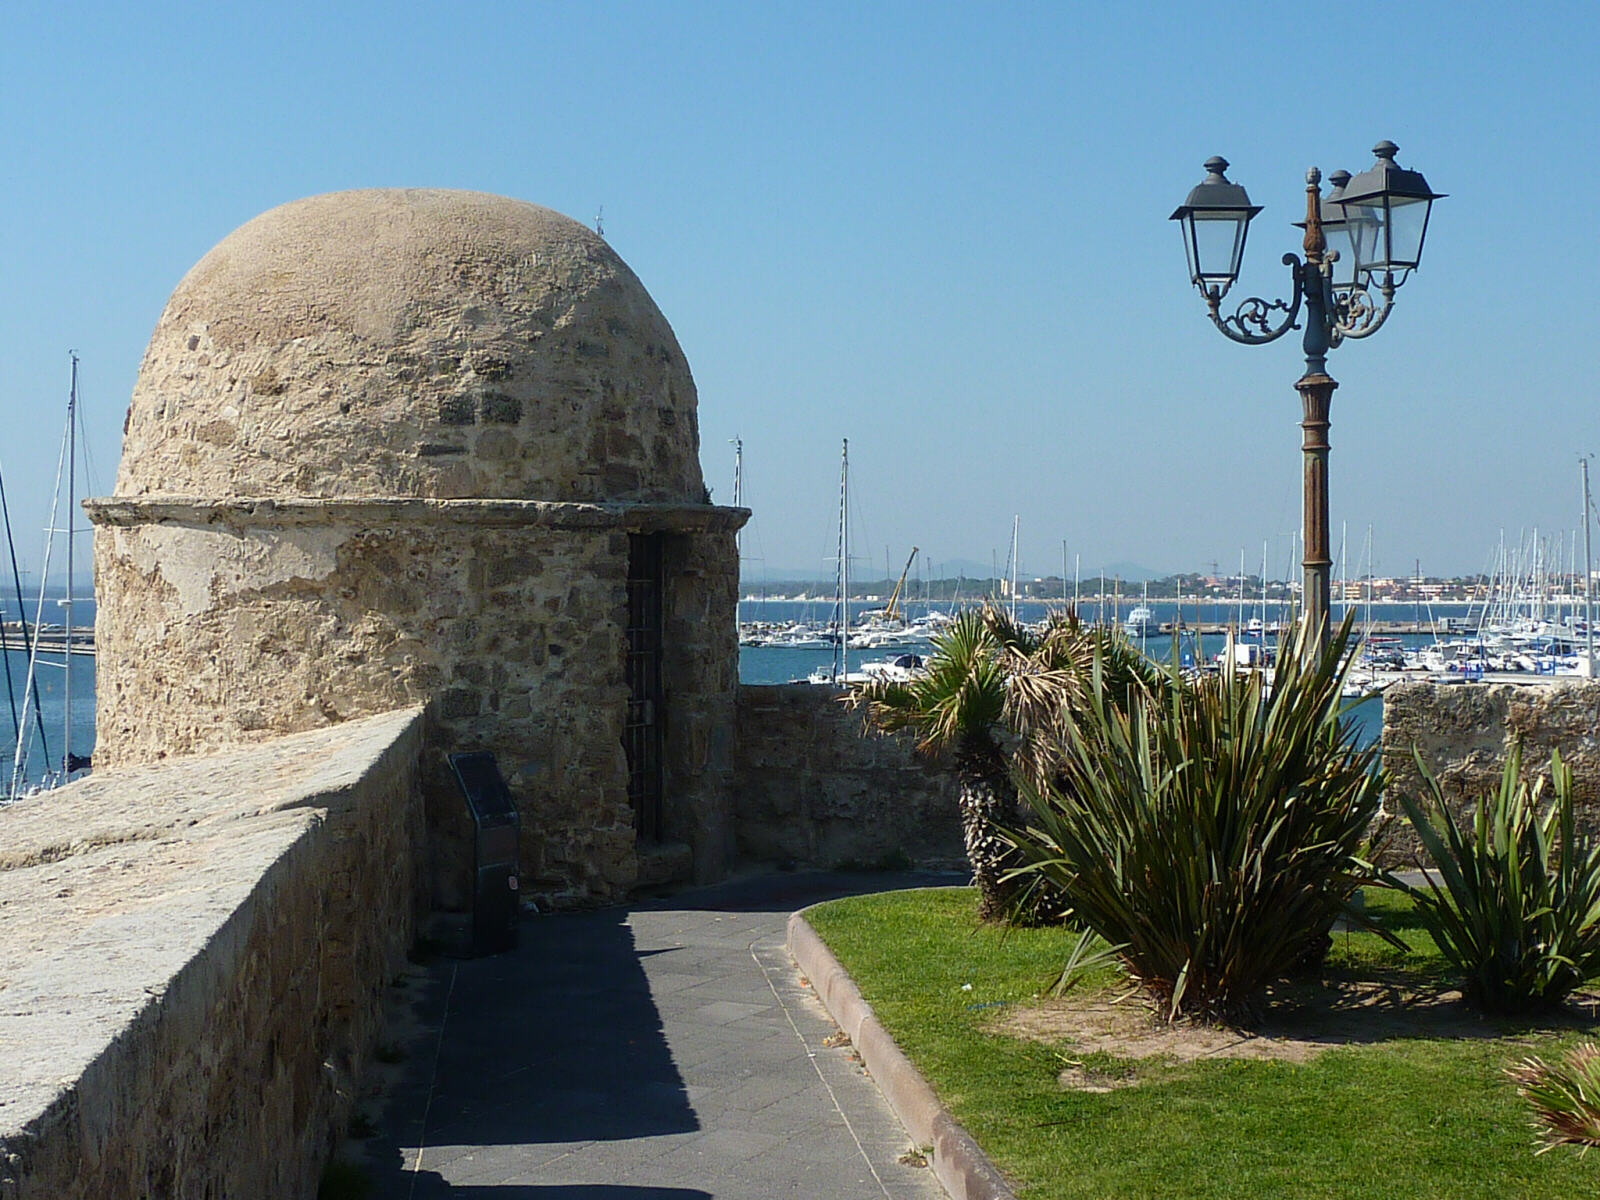 The harbour from inside the fort, Alghero, Sardinia